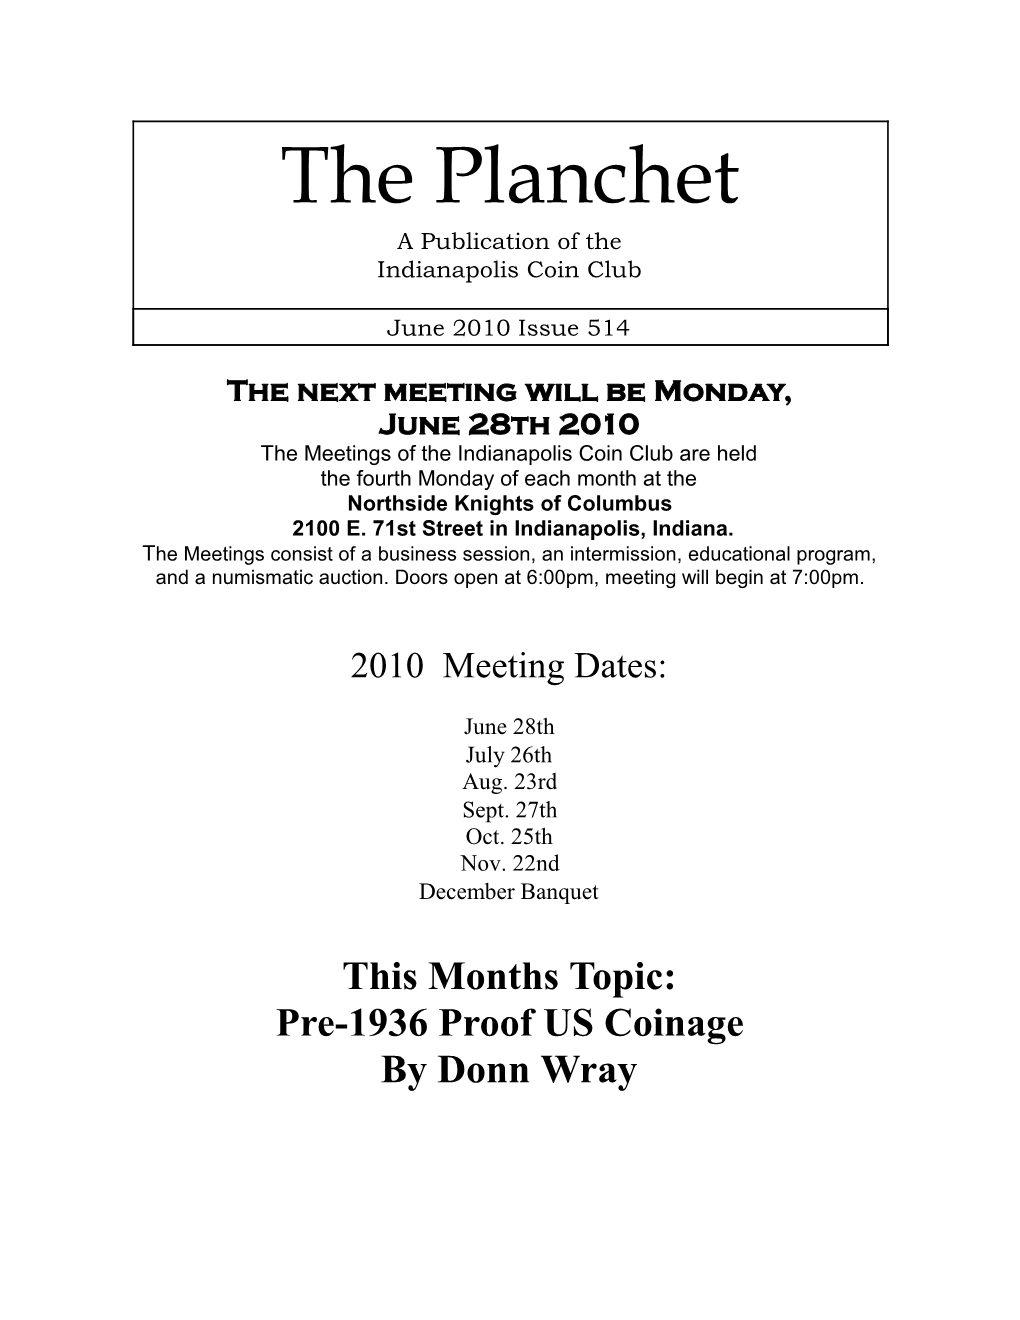 The Planchet a Publication of the Indianapolis Coin Club